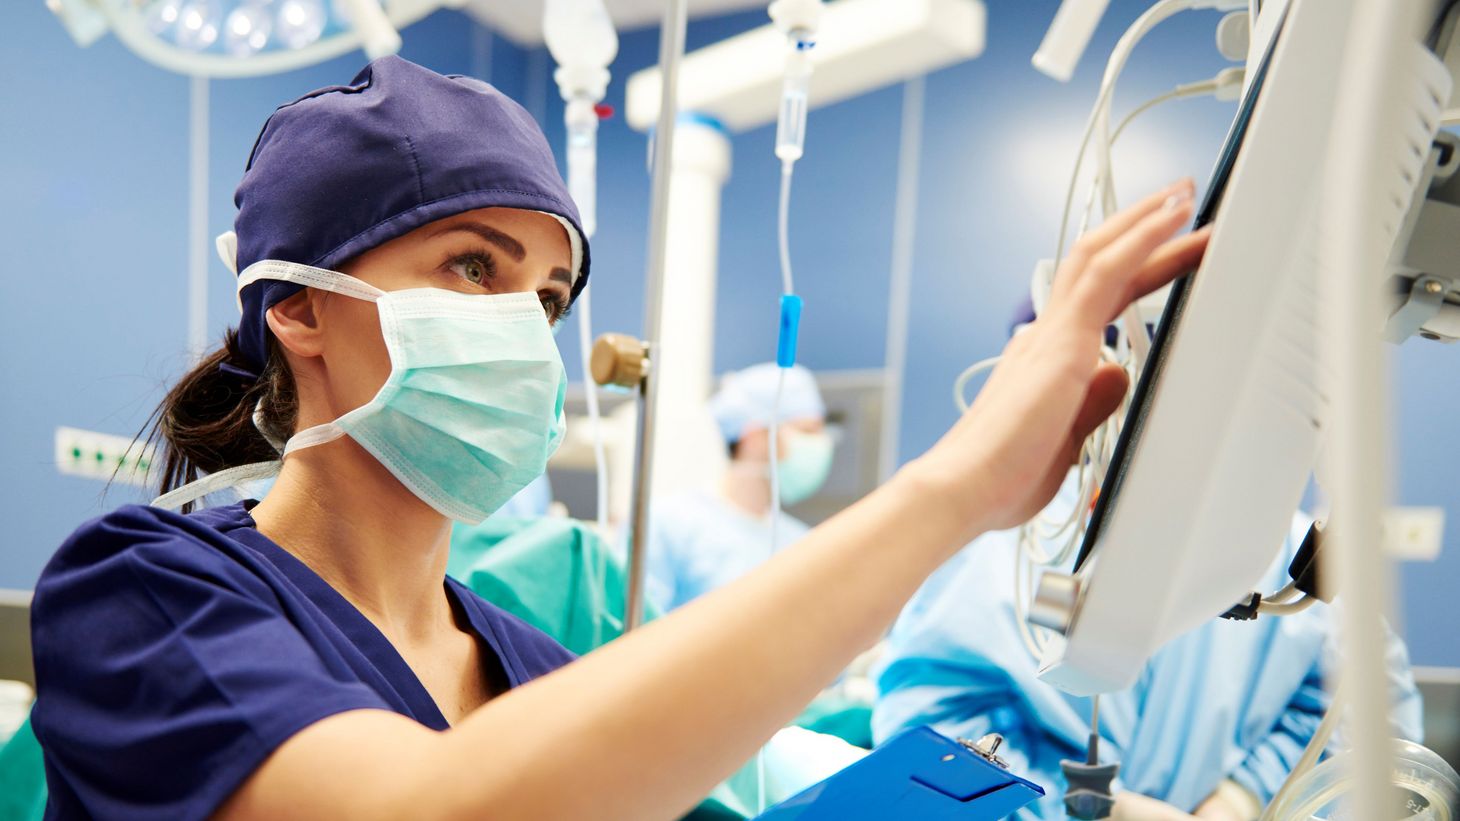 Nurse anesthetist in the operating room